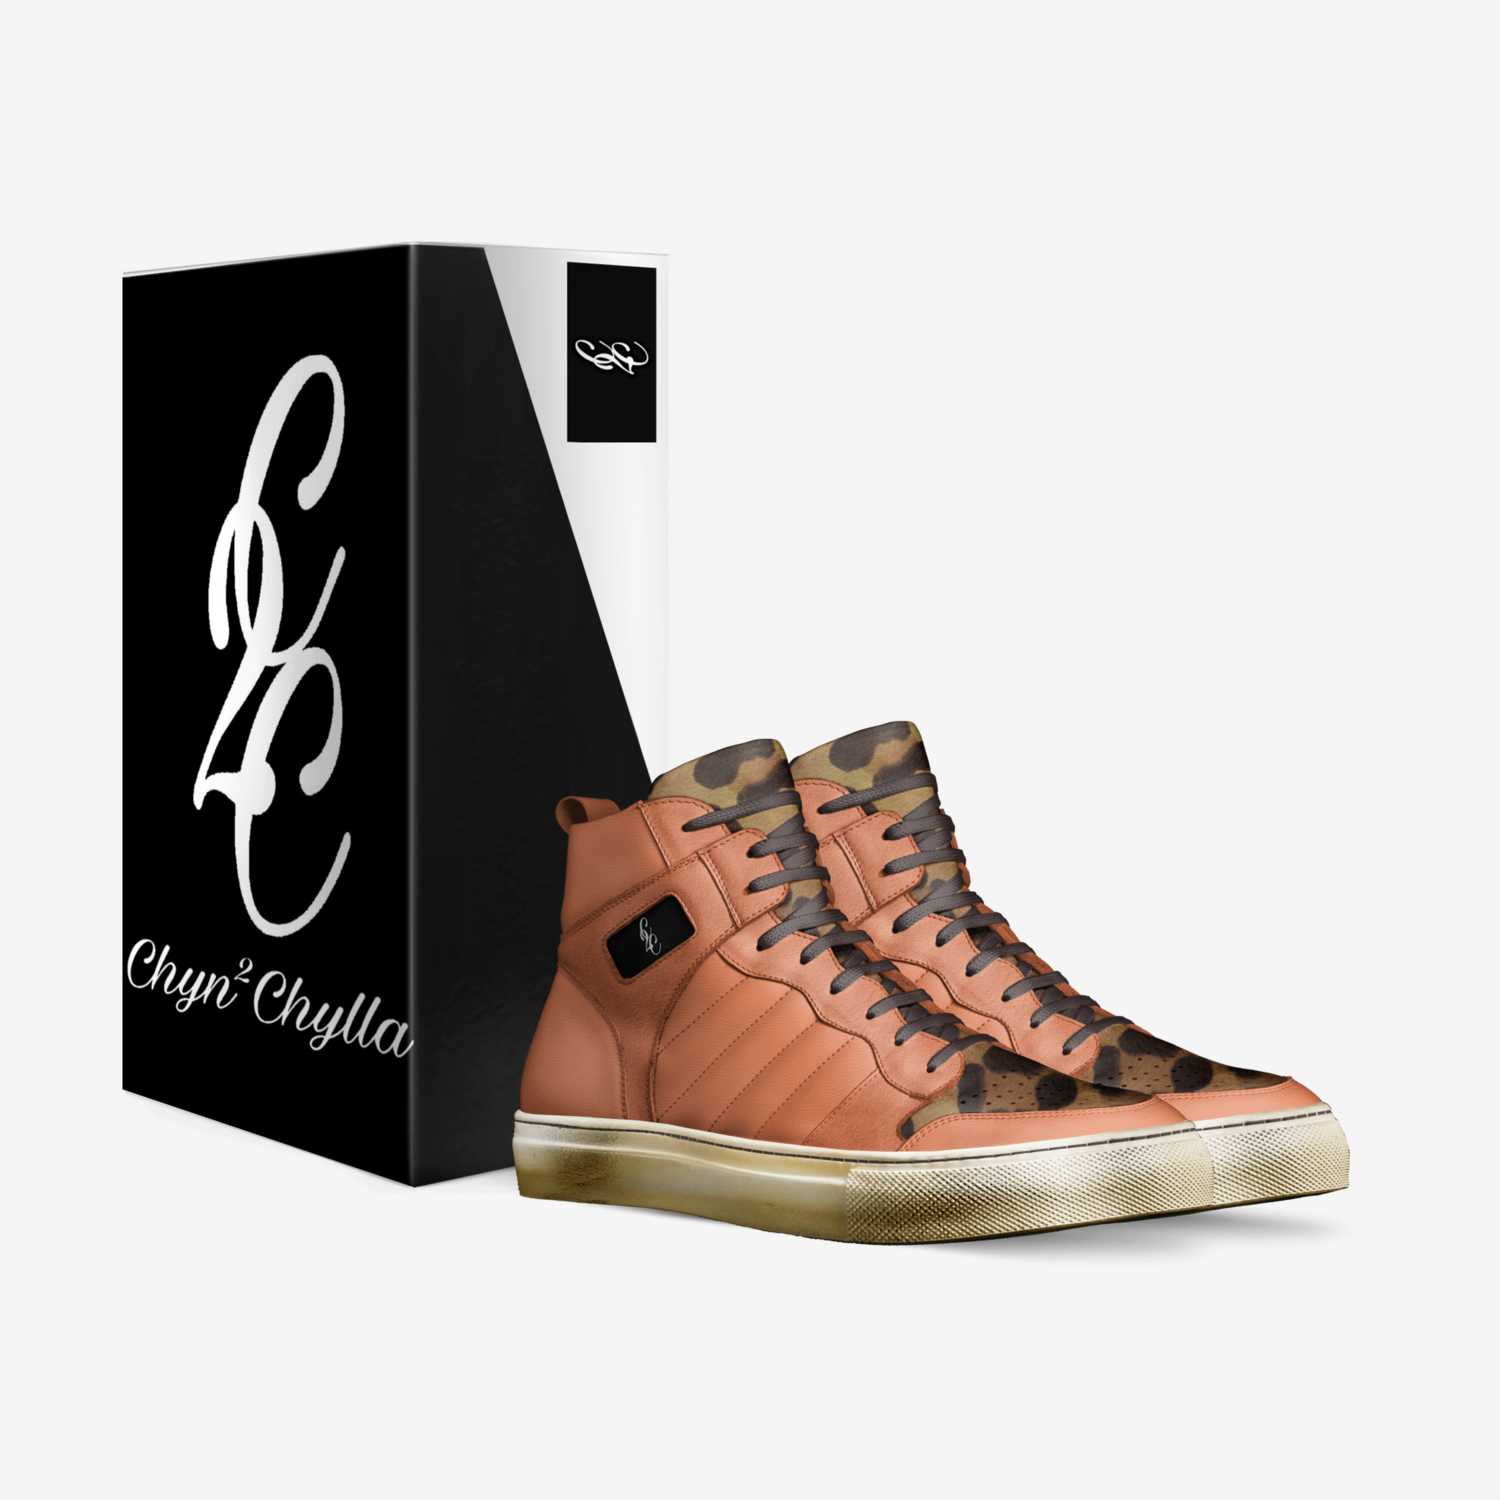 Chyll Godz custom made in Italy shoes by Chyn² Chylla | Box view